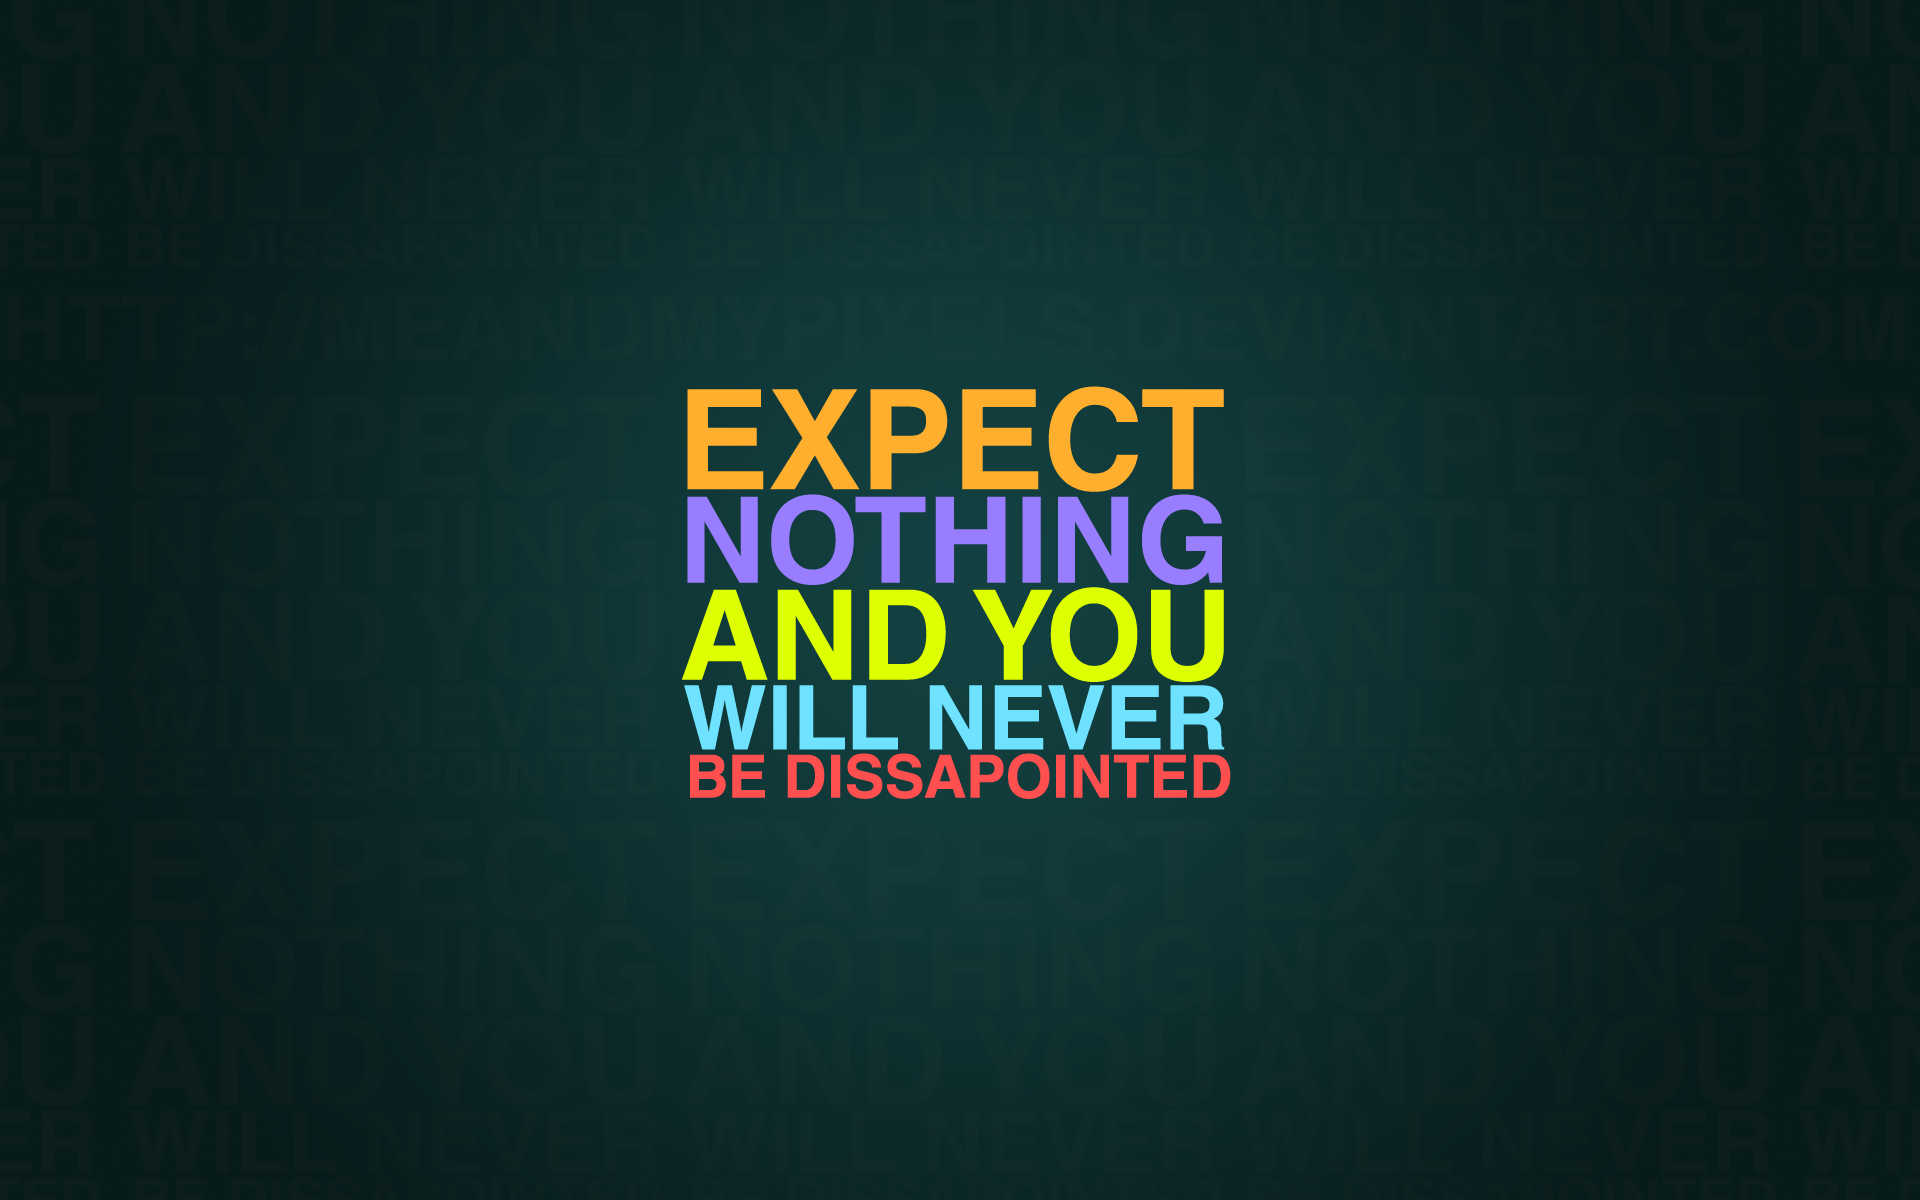 Expect nothing and you will never be disappointed #motivational. Inspirational quotes wallpaper, Life quotes wallpaper, Motivational quotes wallpaper